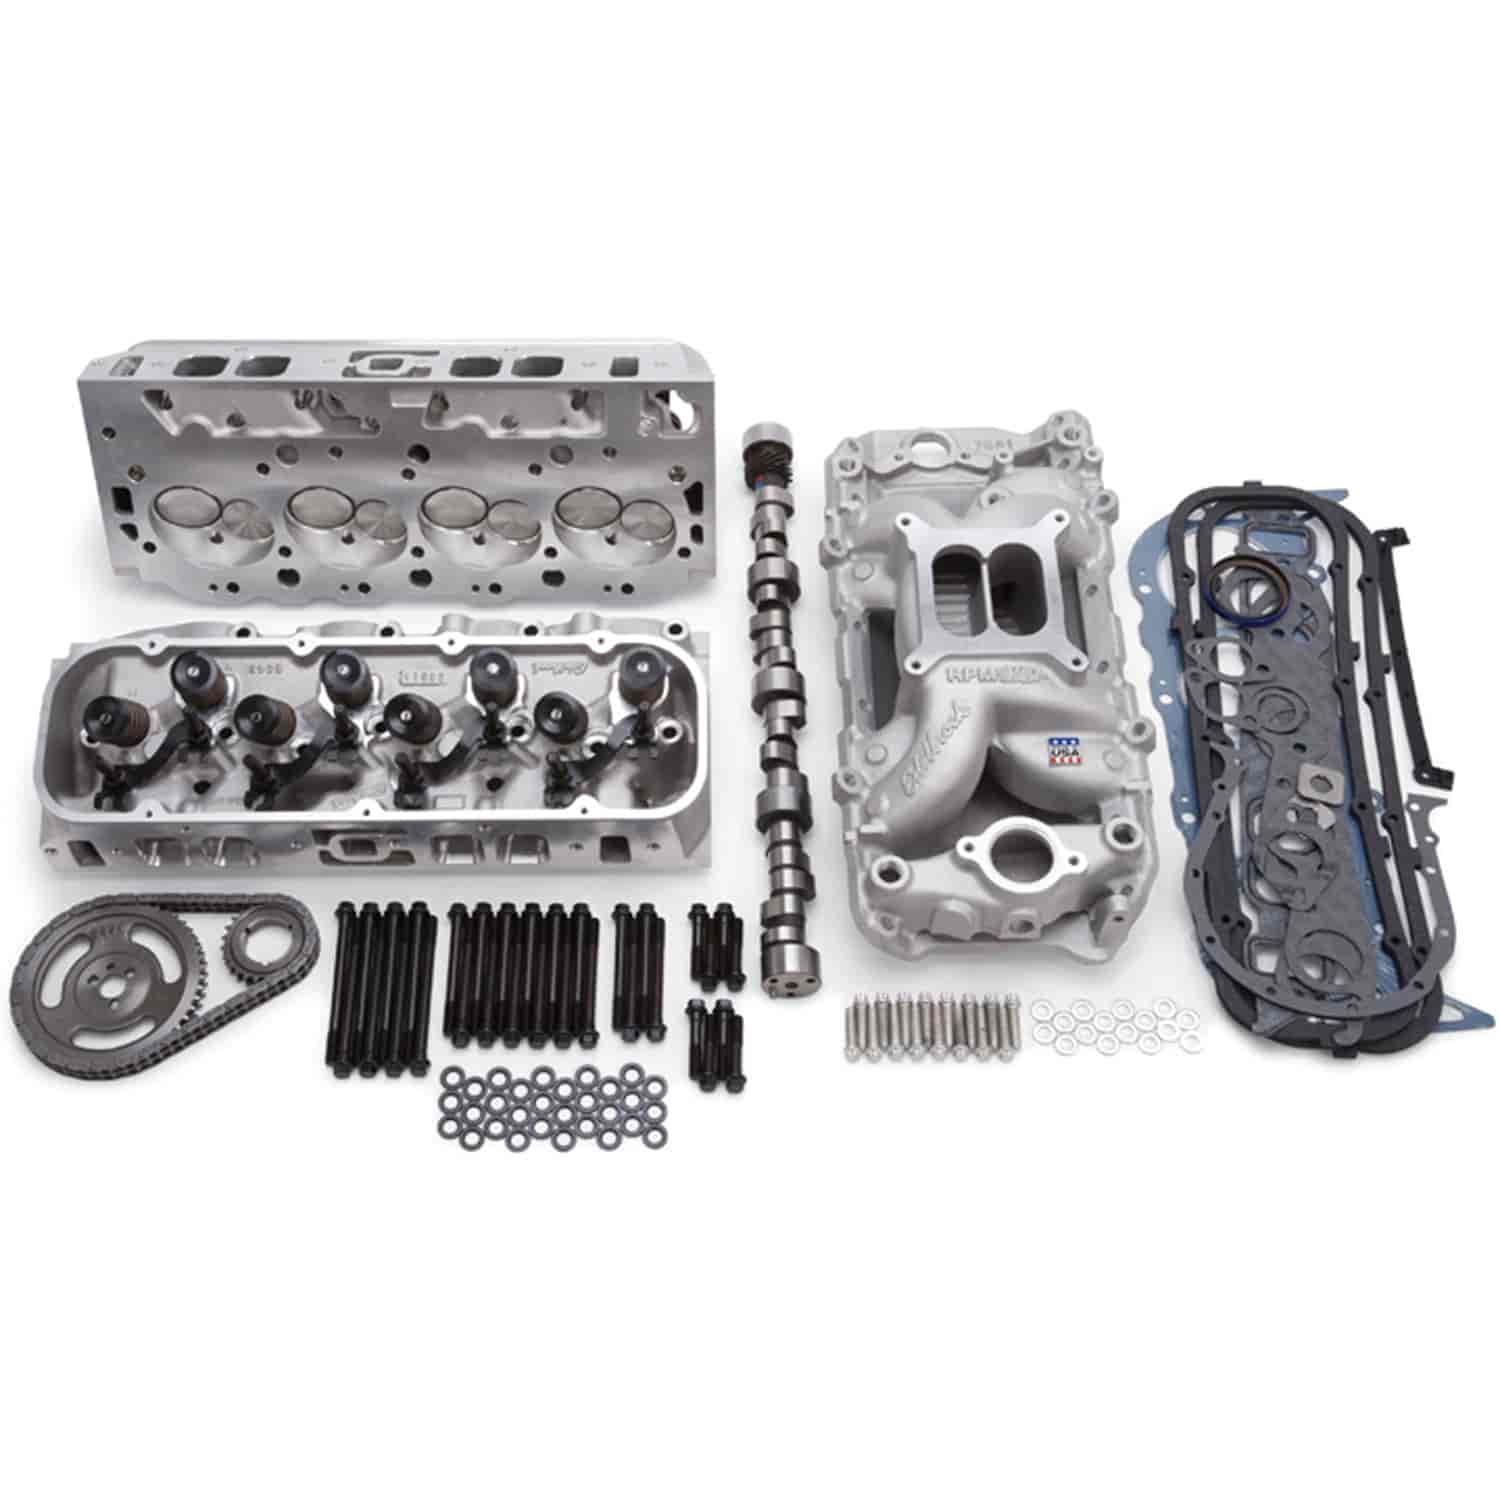 RPM Power Package Kit for 1965-1995 Mark IV Big Block Chevy 396-454ci